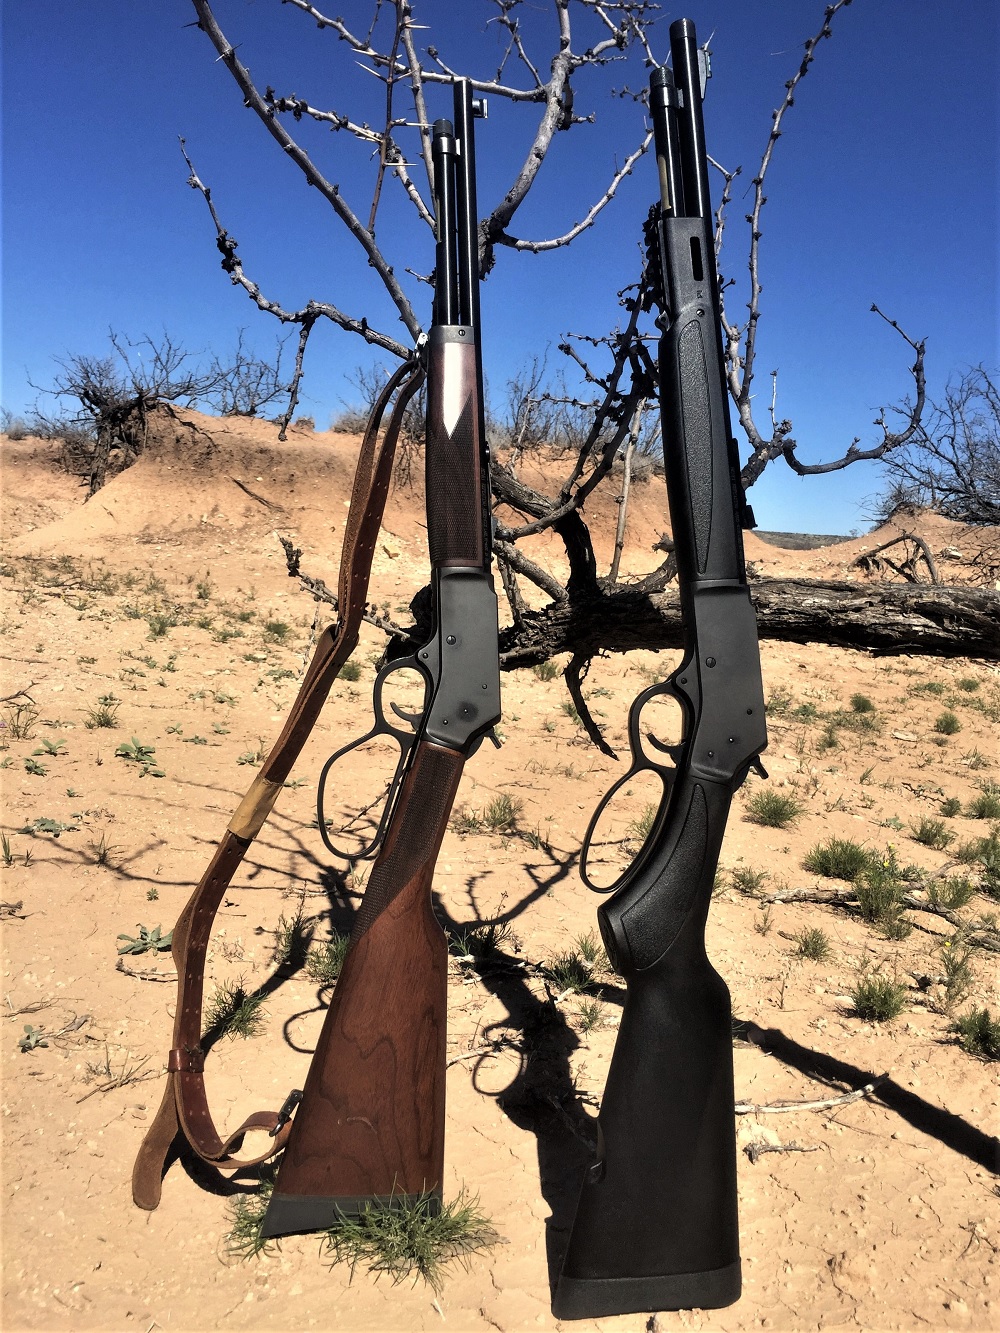 Lever Action Carbines